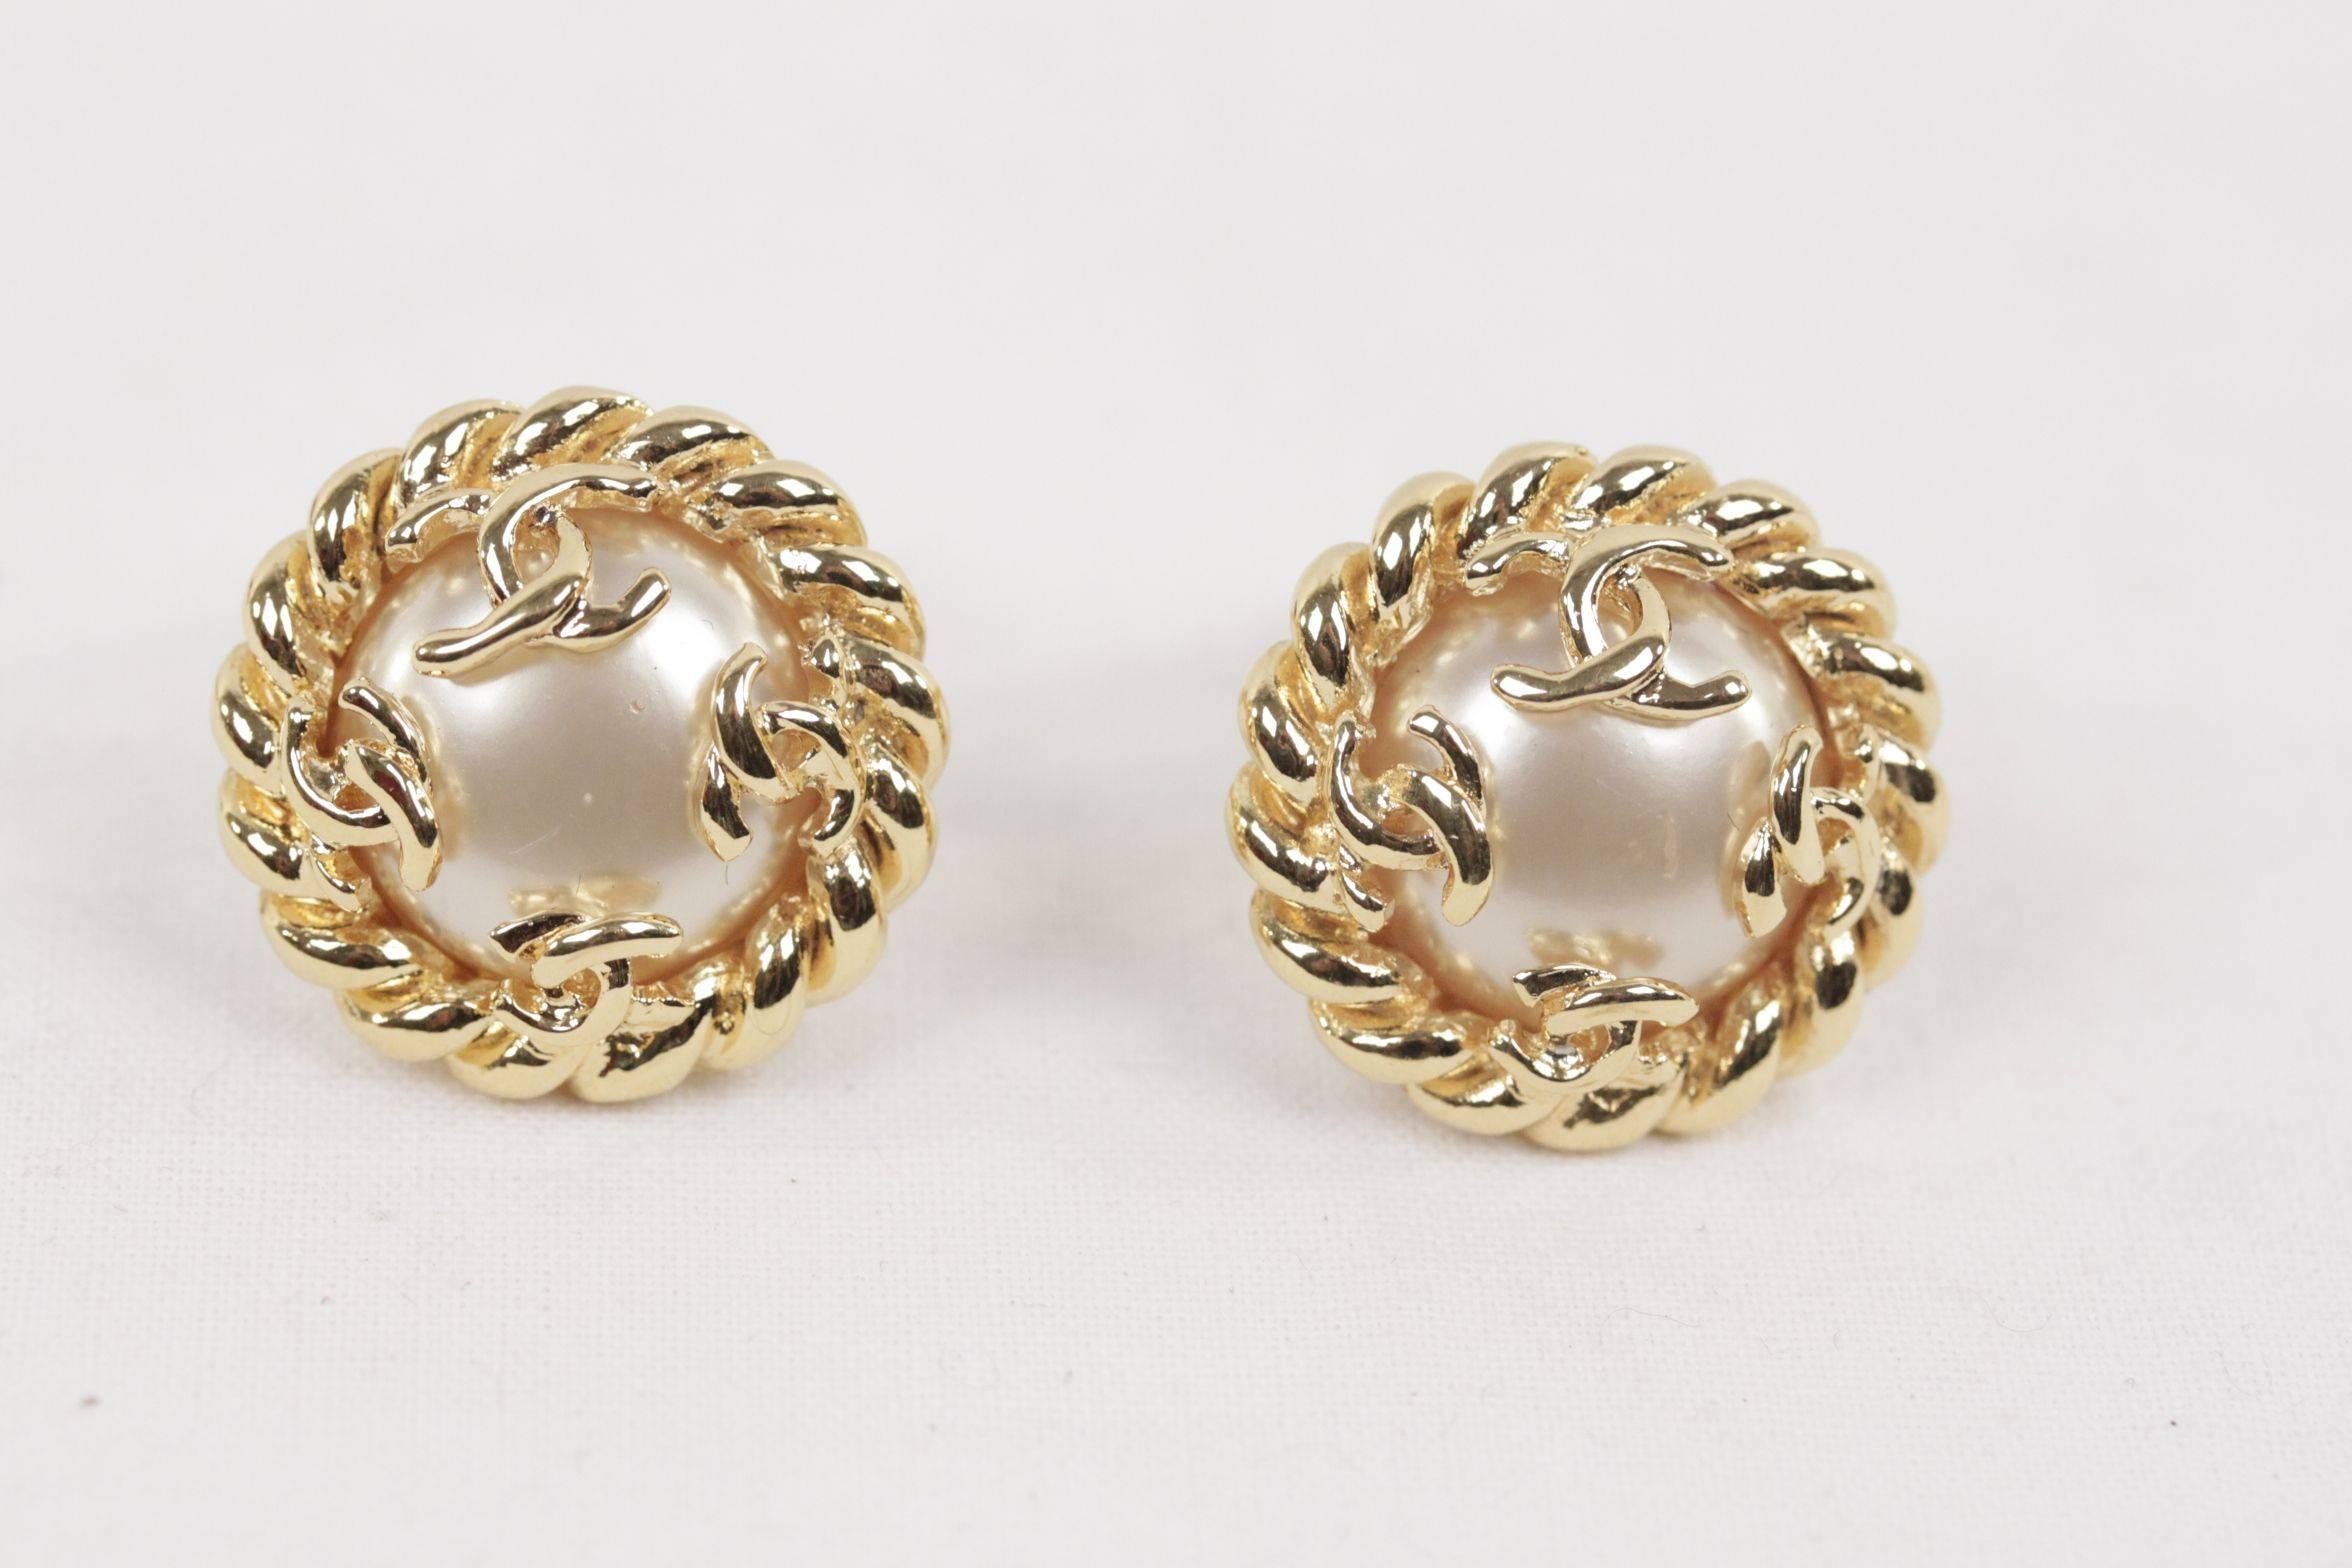  - Gorgeous vintage CHANEL earrings

- Faux Pearl and gold metal twisted rope

- CC - CHANEL logo detailing

- Clip-on earrings

- Signed ' C CHANEL R - 95 CC A - MADE IN FRANCE' in a oval mark.

- Approx. measurements: 1 x 1 inches - 2,5 x2,5 cm

-